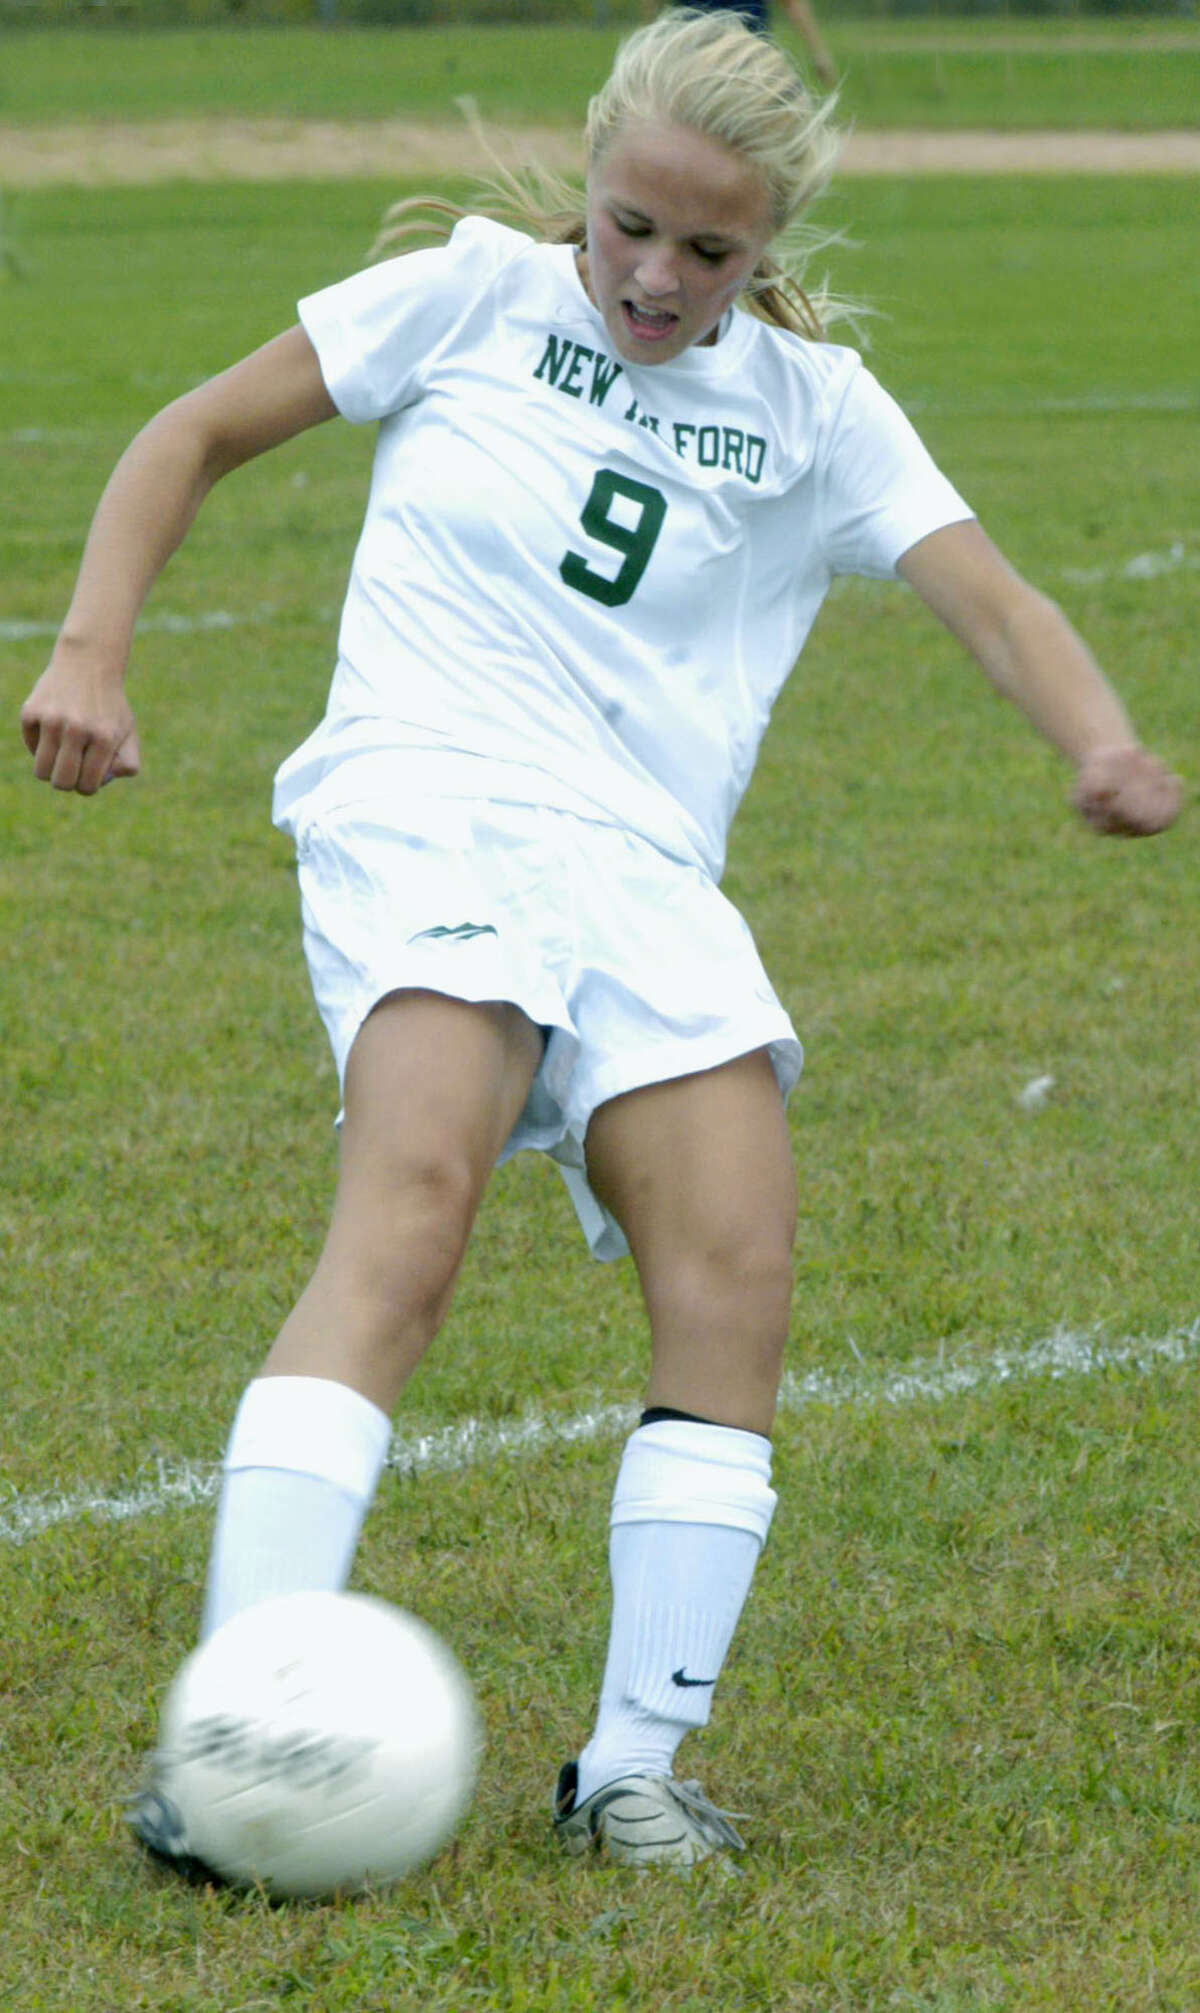 THe Green Wave's Claudia Taylor strikes a crossing pass from the right wing during New Milford High School girls' soccer's Sept. 22, 2012 match vs. Kolbe Cathedral at NMHS.